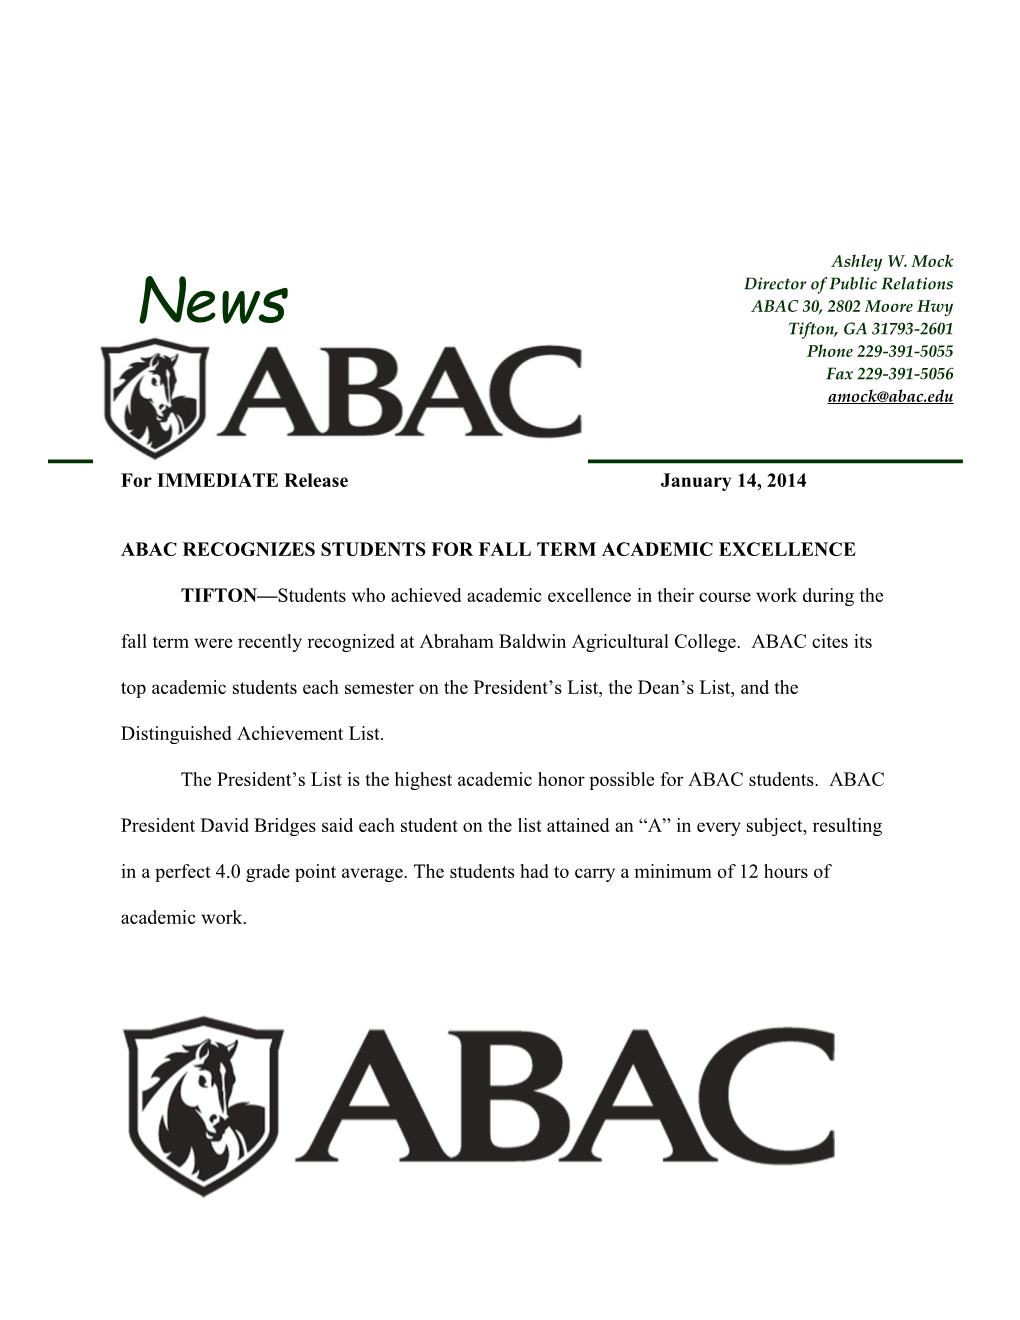 Abac Recognizes Students for Fall Term Academic Excellence